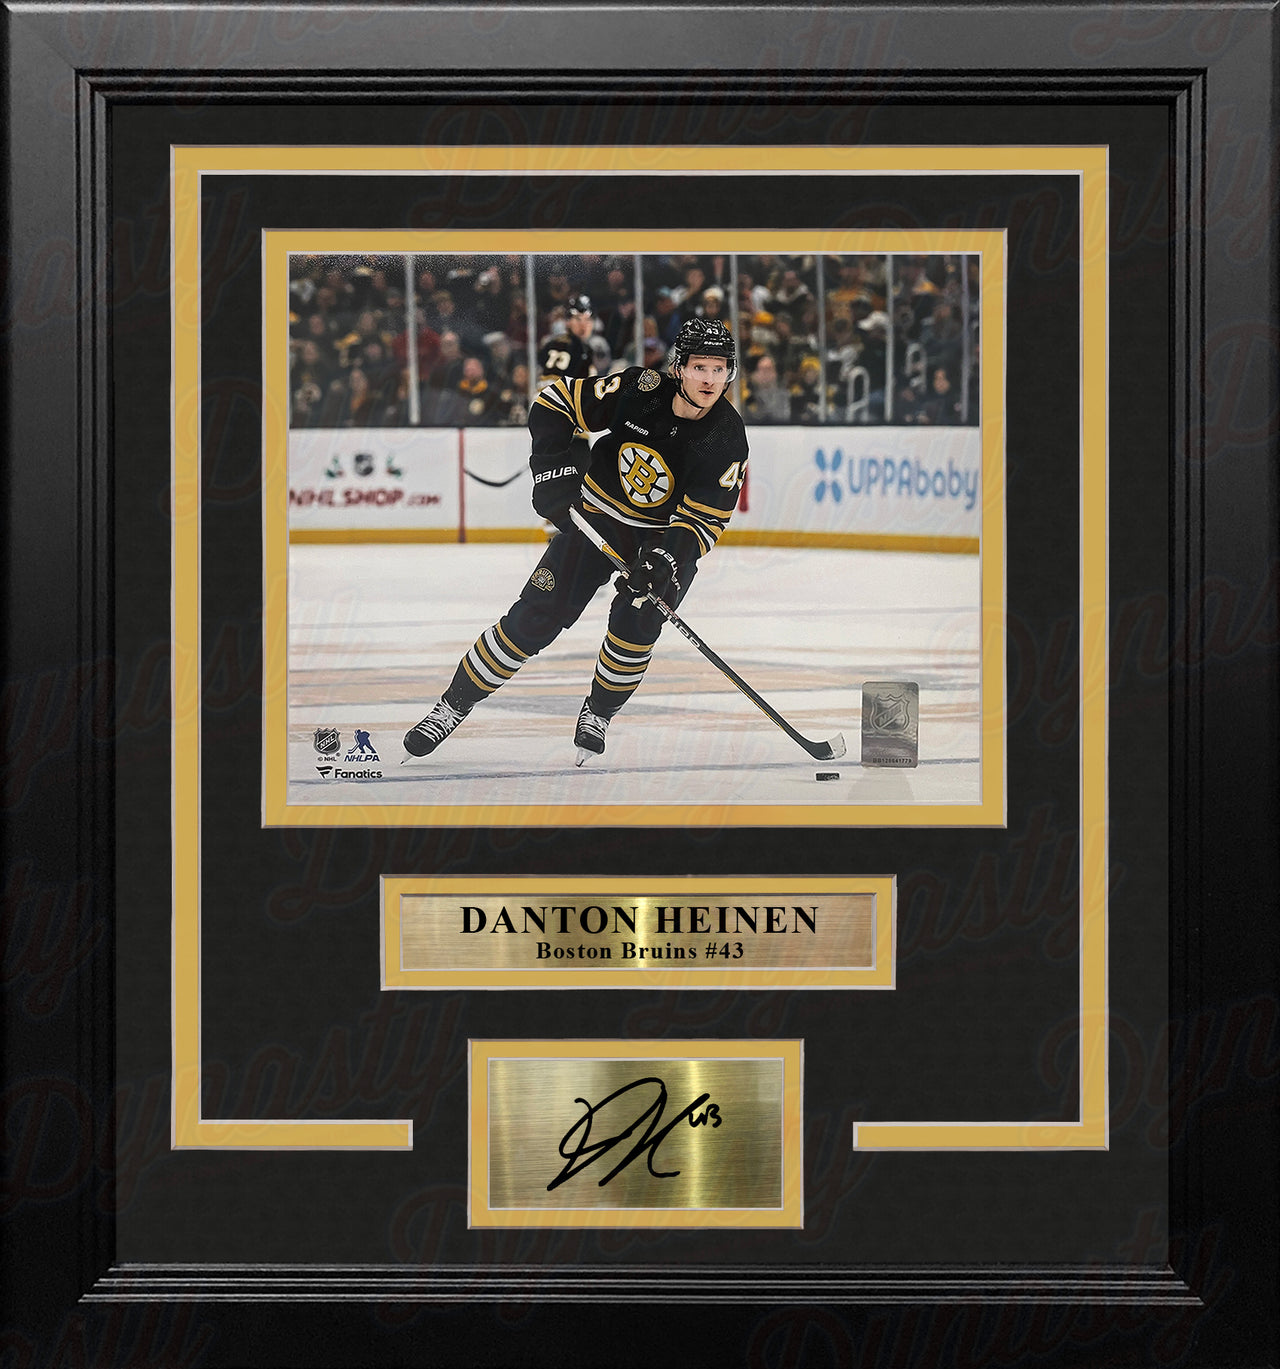 Danton Heinen in Action Boston Bruins 8" x 10" Framed Hockey Photo with Engraved Autograph